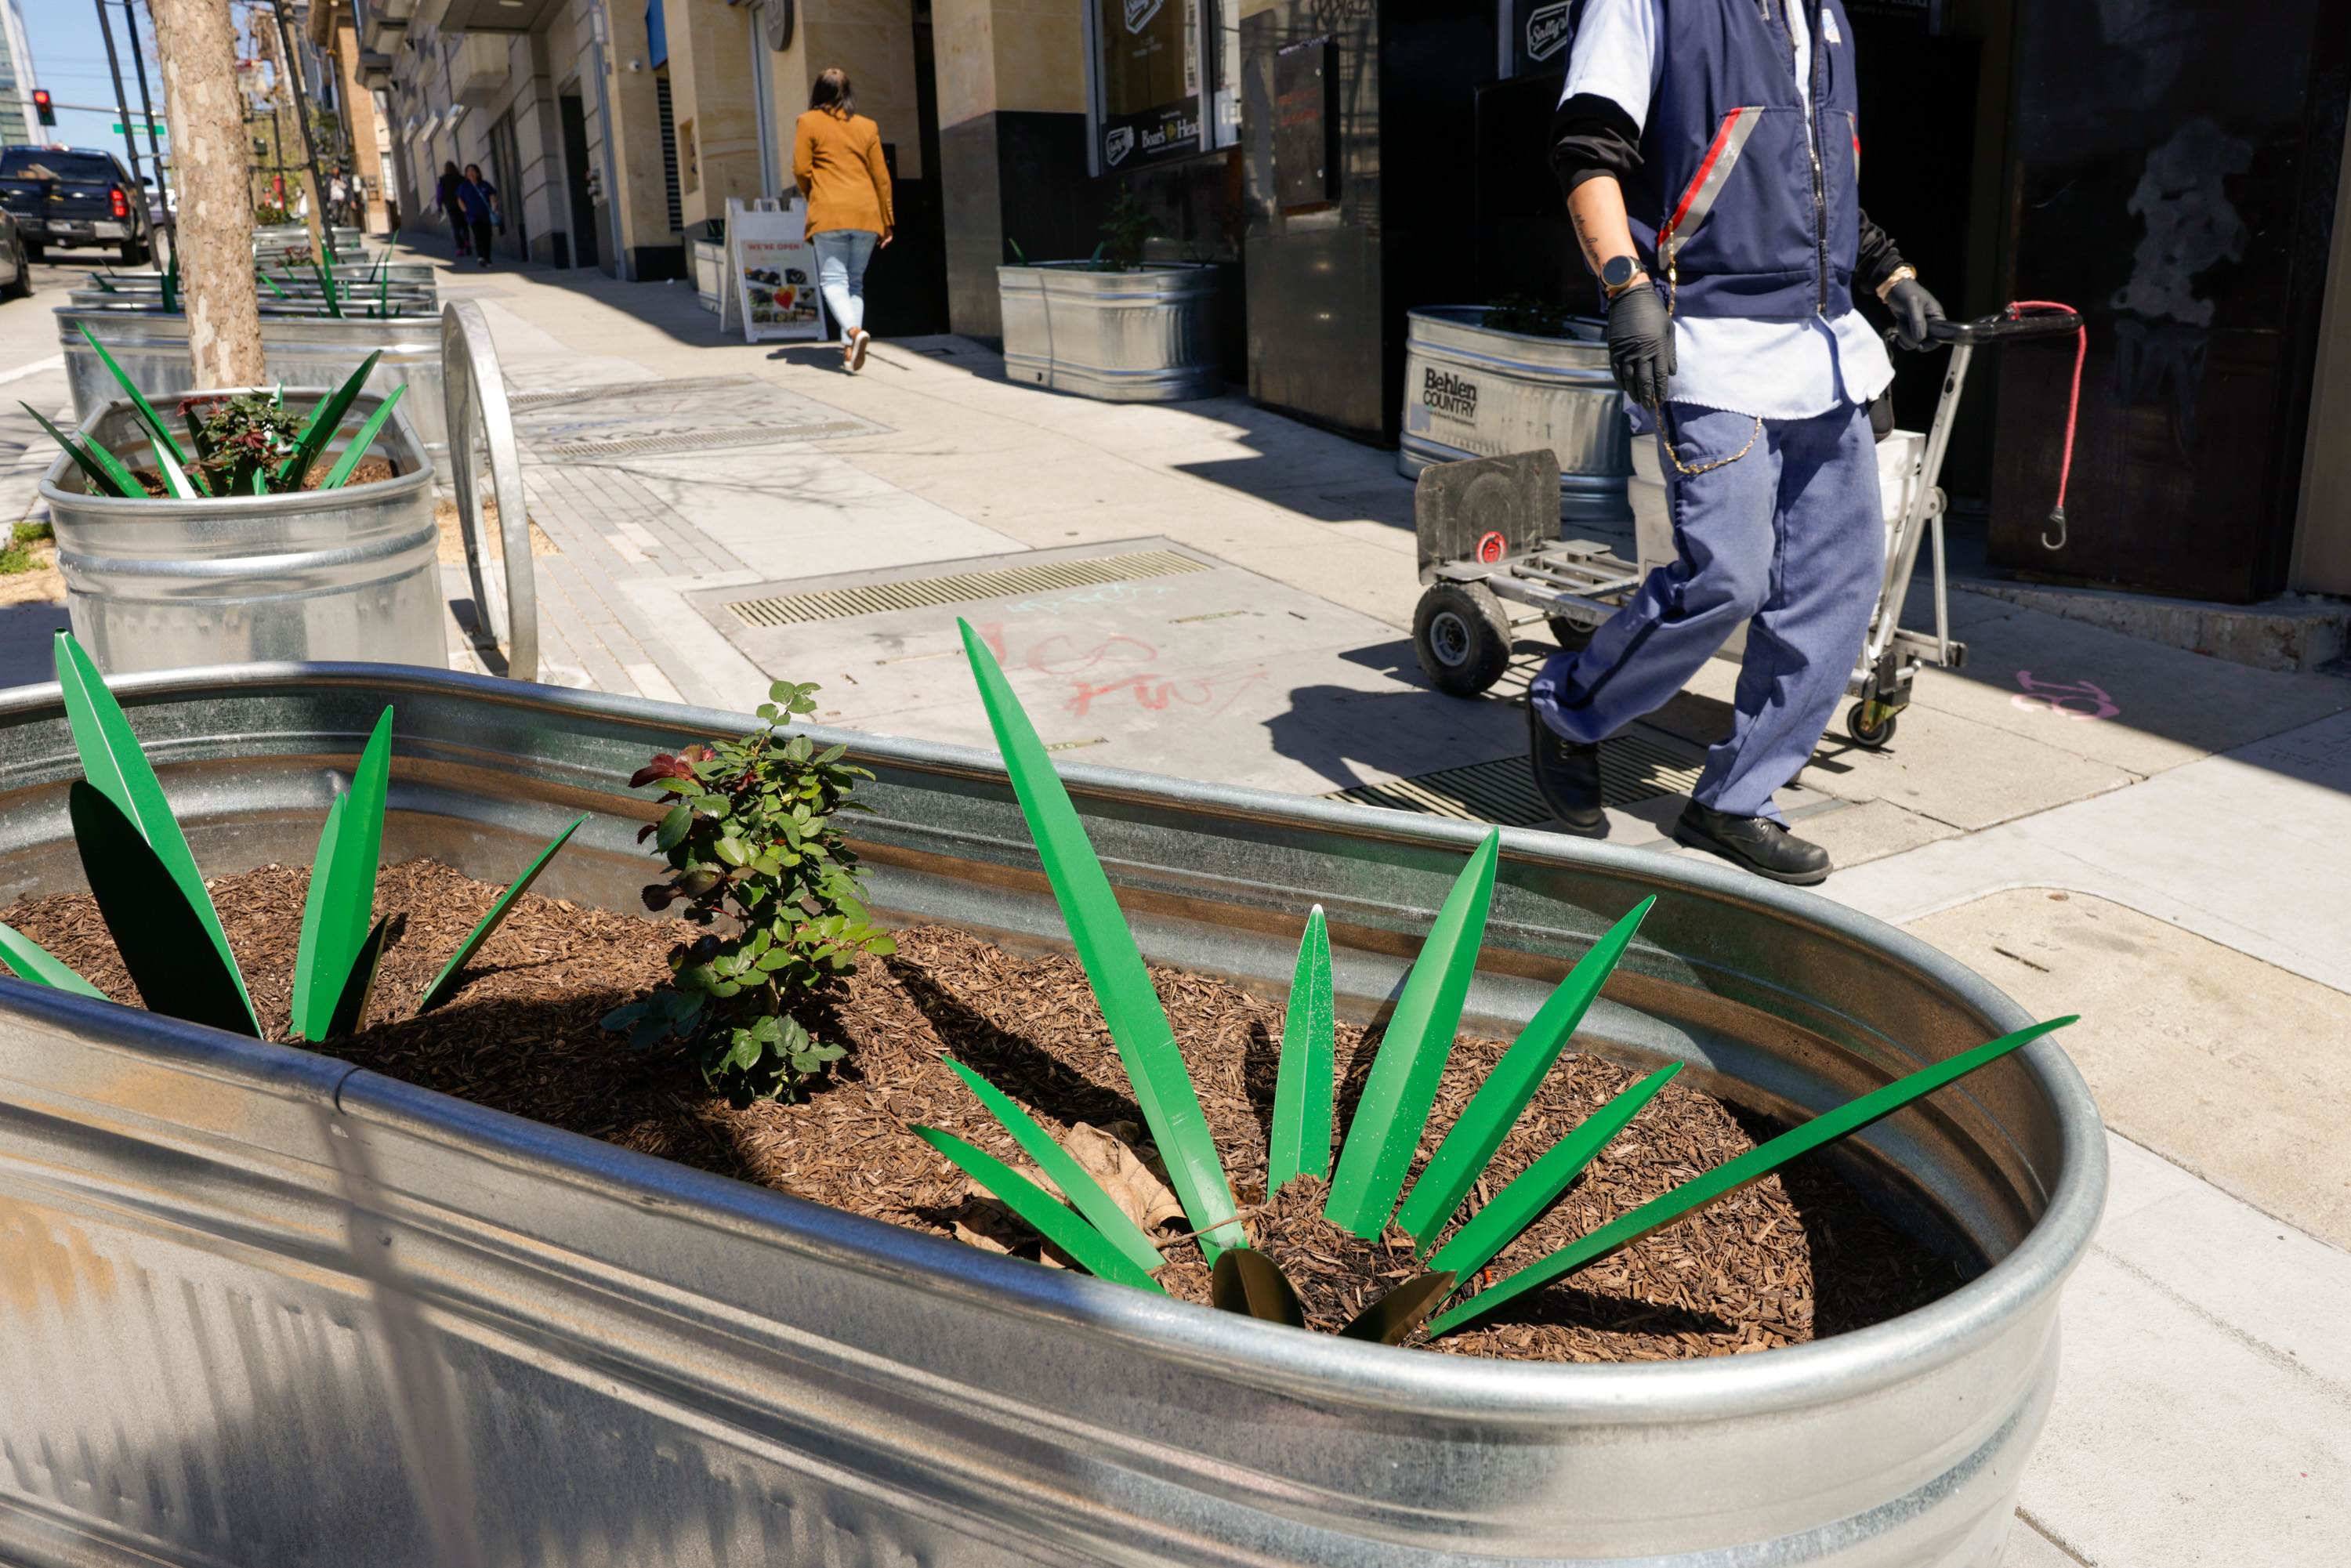 Metal planters with greenery line a sunny sidewalk; a person in work attire walks by, pulling a hand truck.